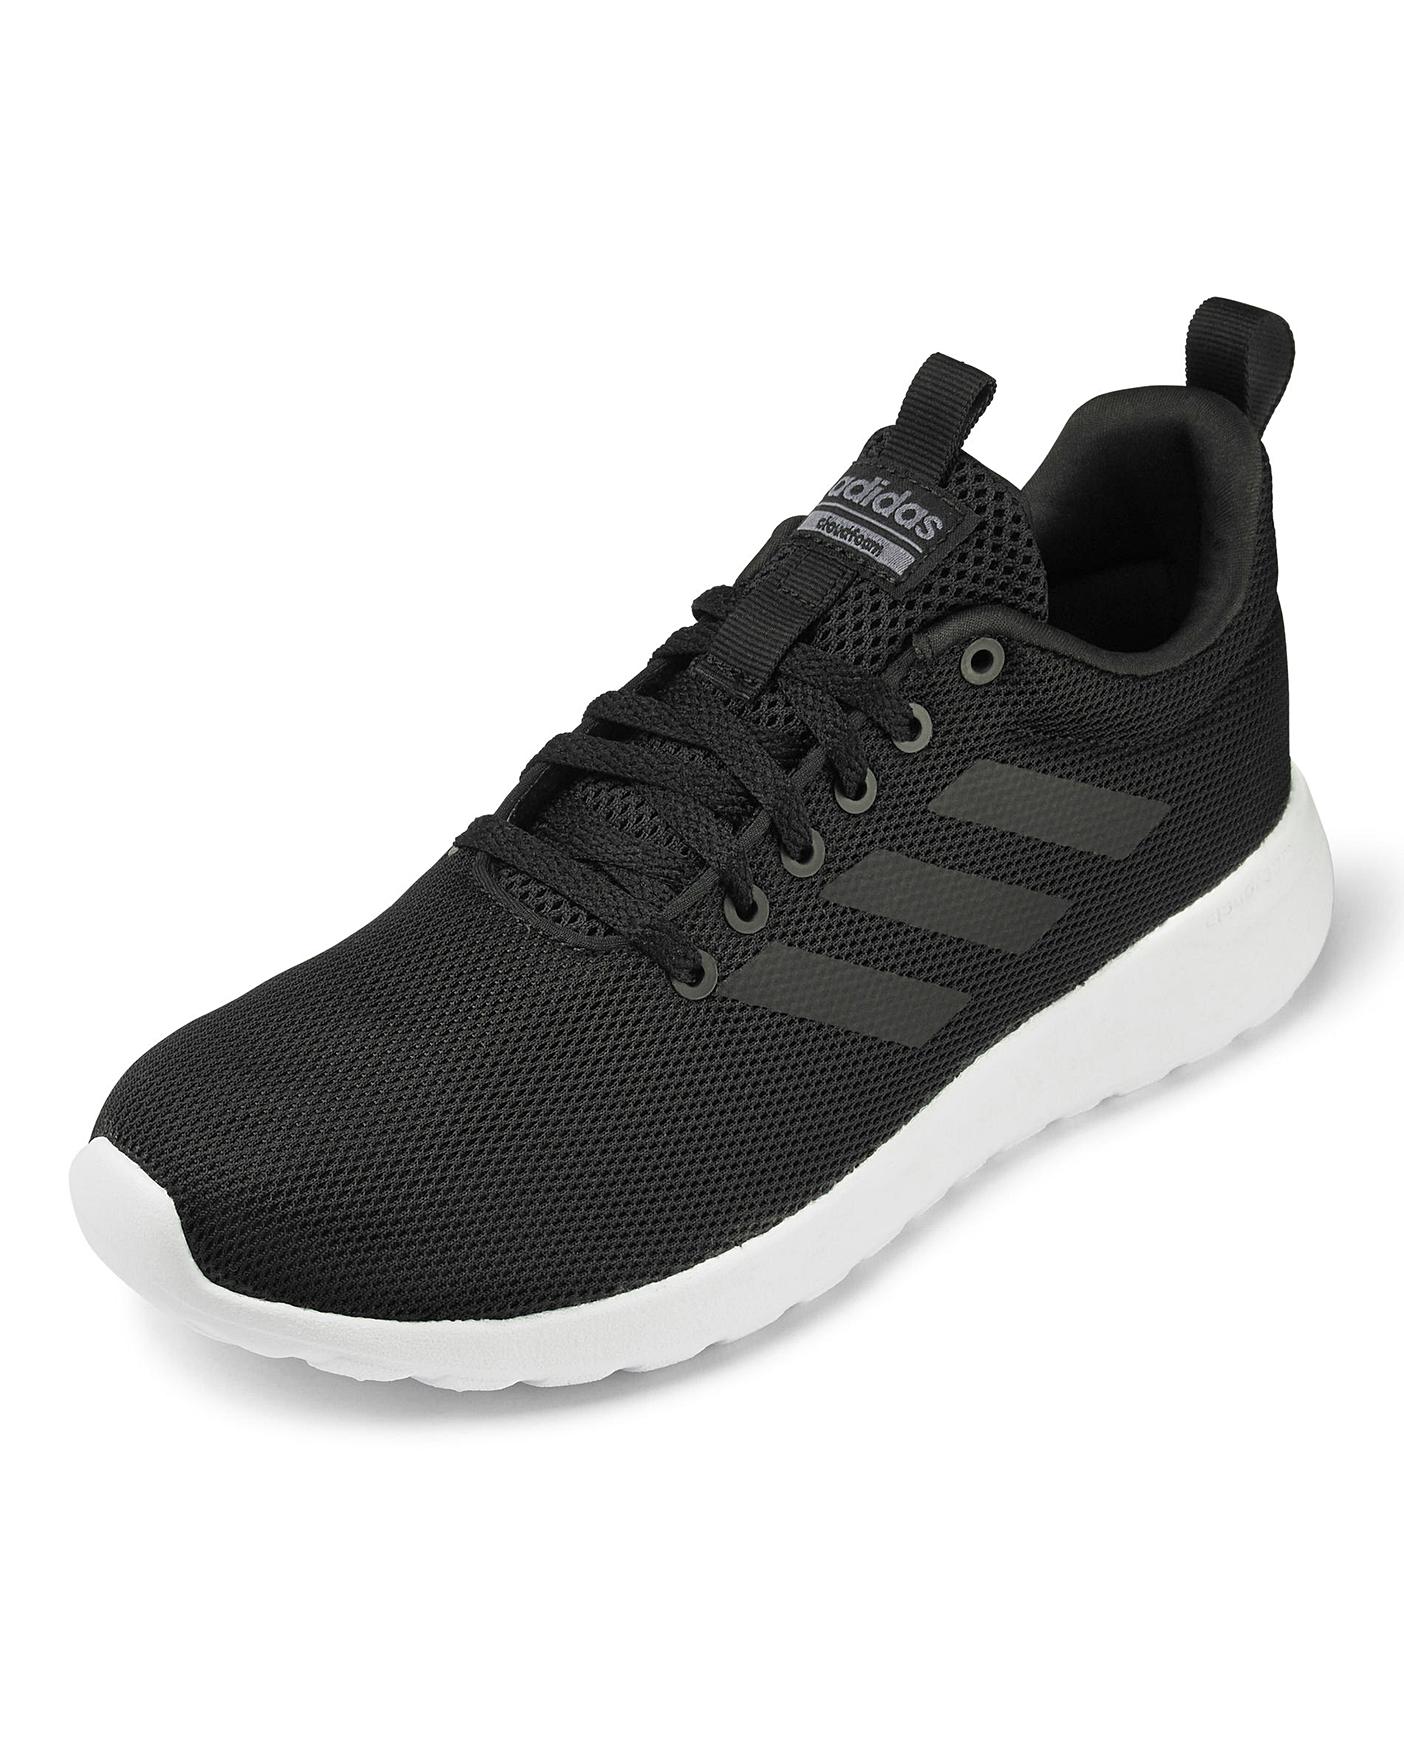 adidas lite racer clean mens trainers